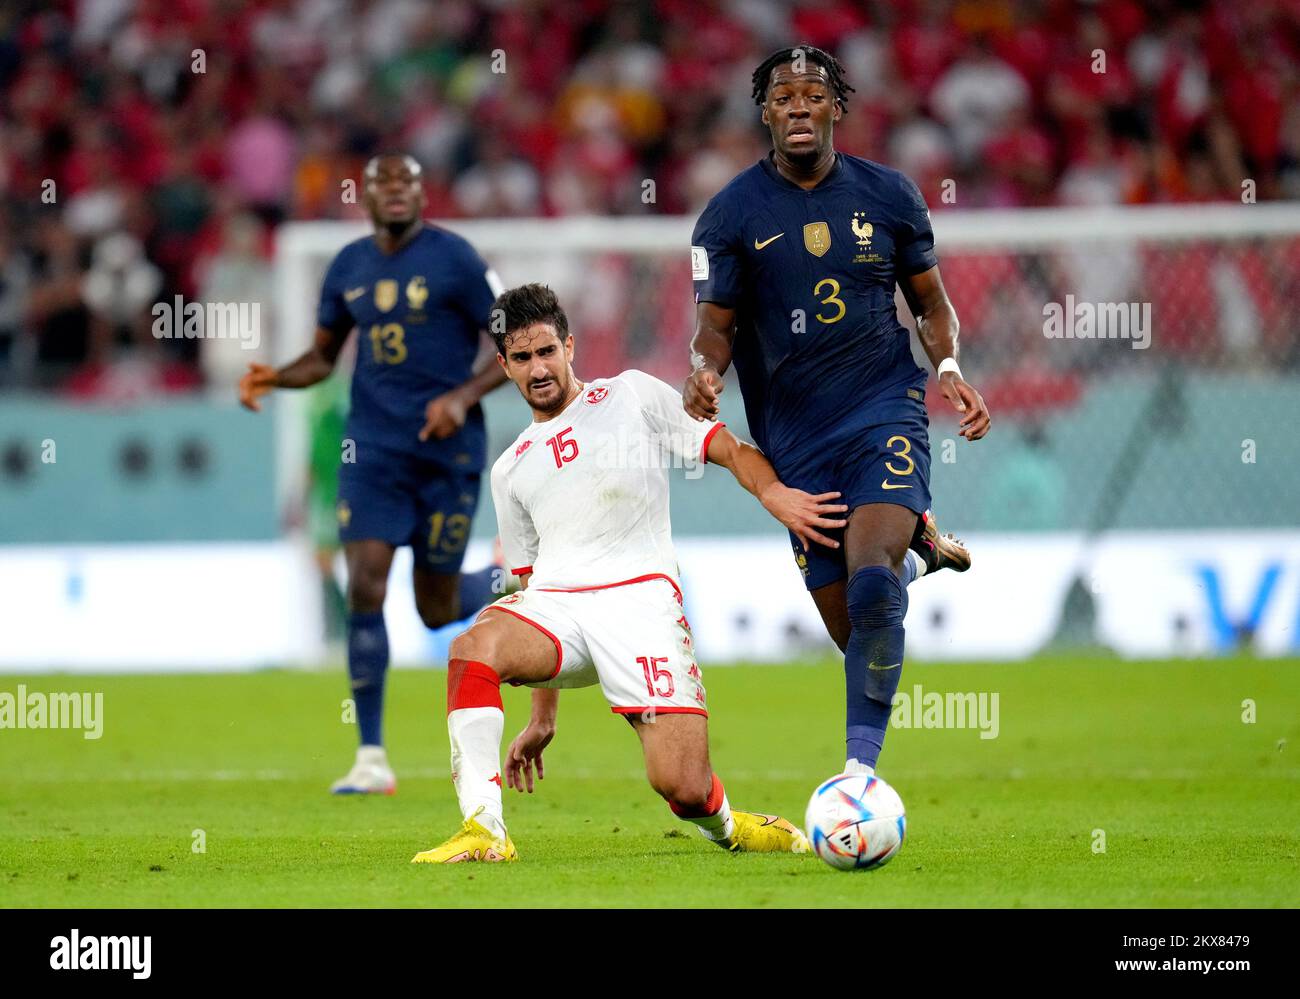 Tunisia's Mohamed Ali Ben Romdhane (left) and France's Axel Disasi battle for the ball during the FIFA World Cup Group D match at the Education City Stadium in Al Rayyan, Qatar. Picture date: Wednesday November 30, 2022. Stock Photo